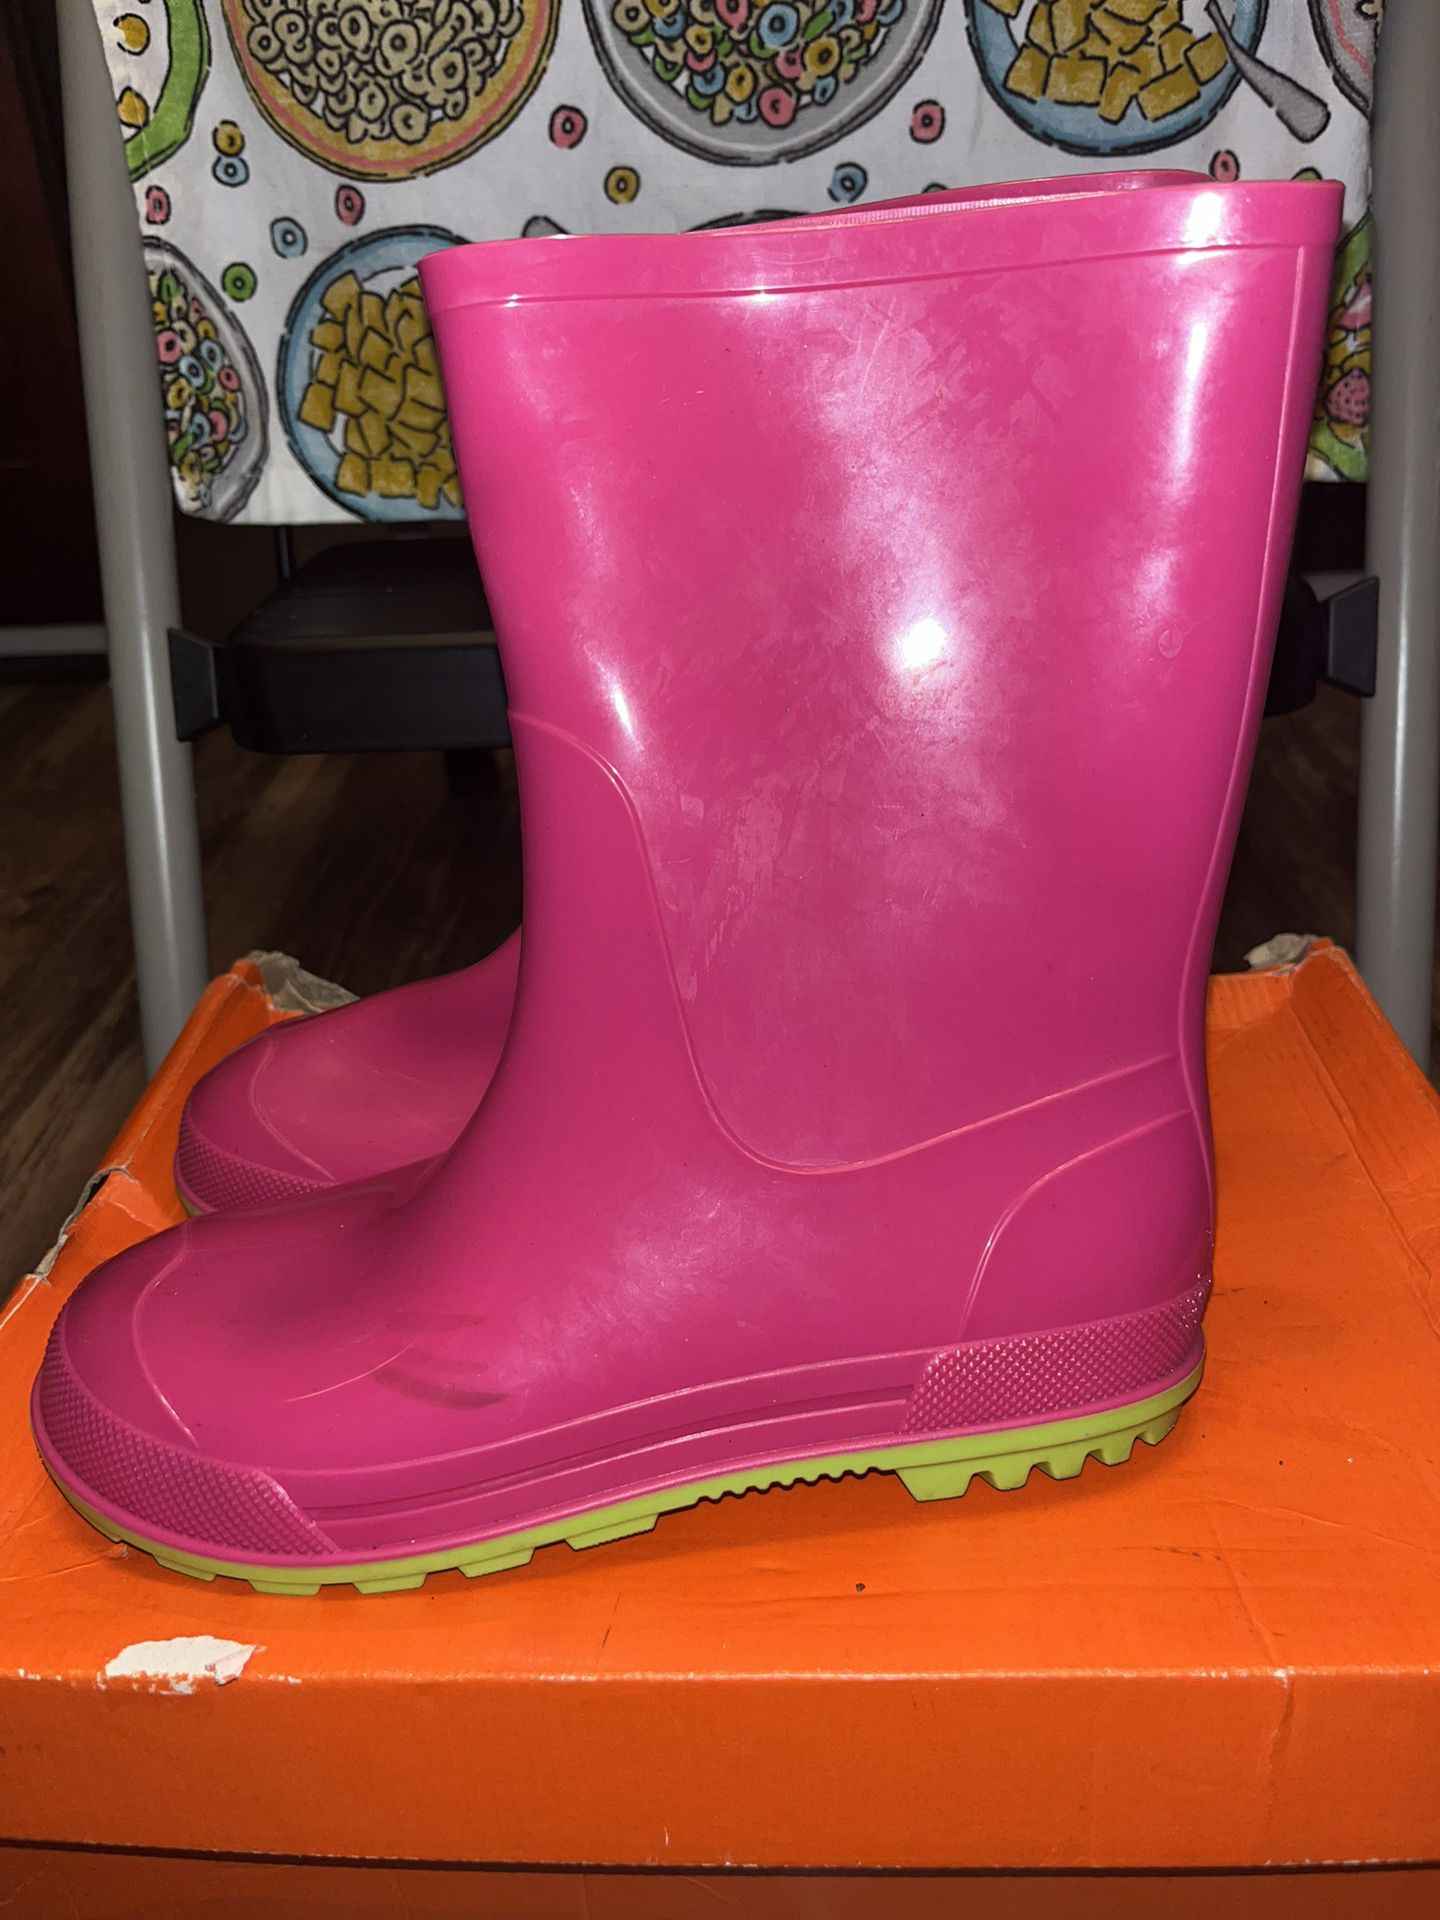 youth pink green rain boots size 2/3 $7 for Sale in Atlanta, GA - OfferUp